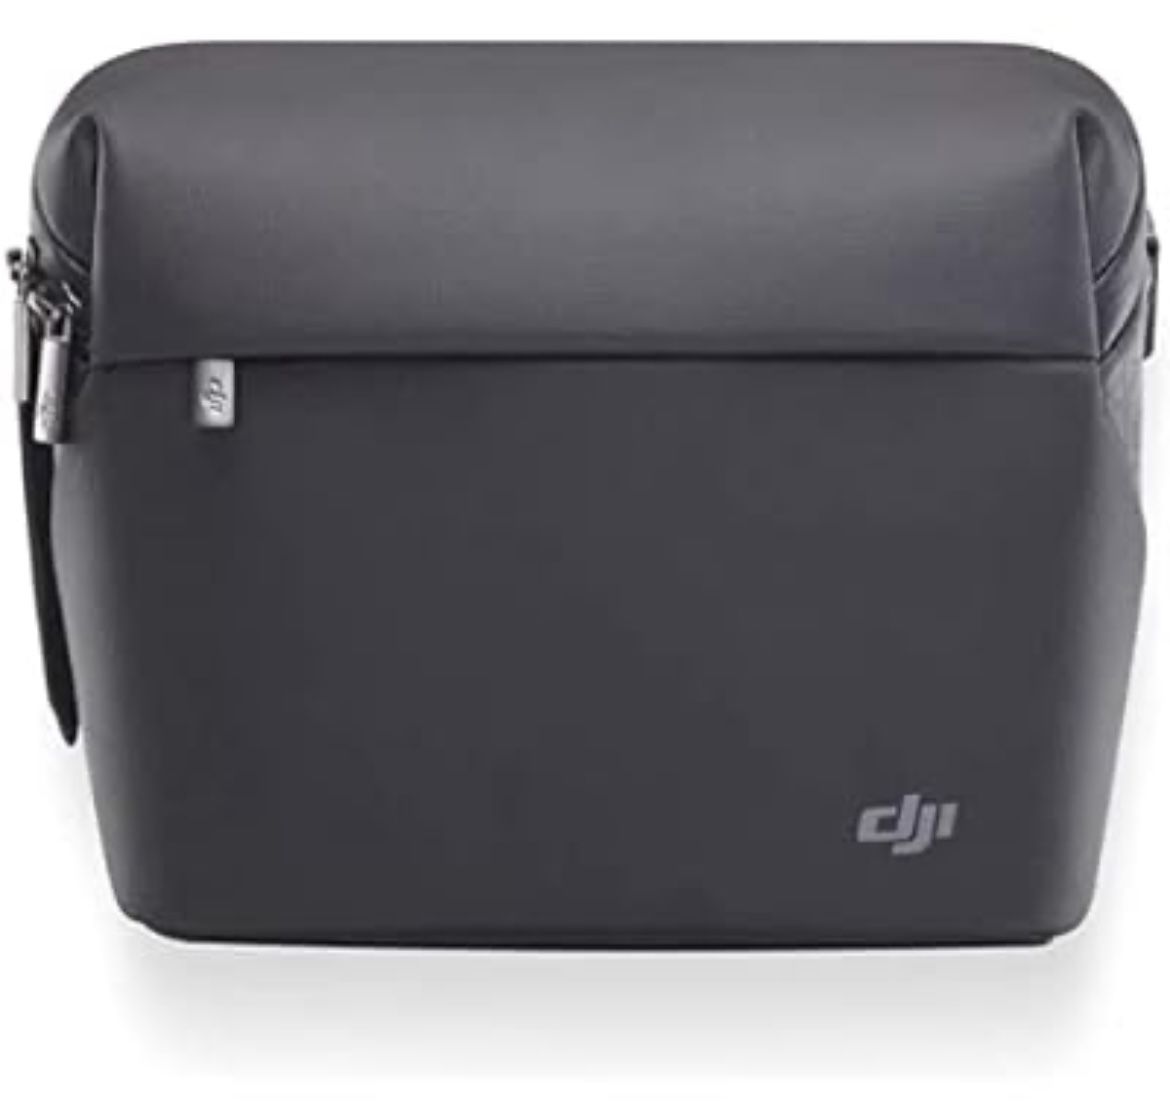 New Drone or Camera Case With Organizers